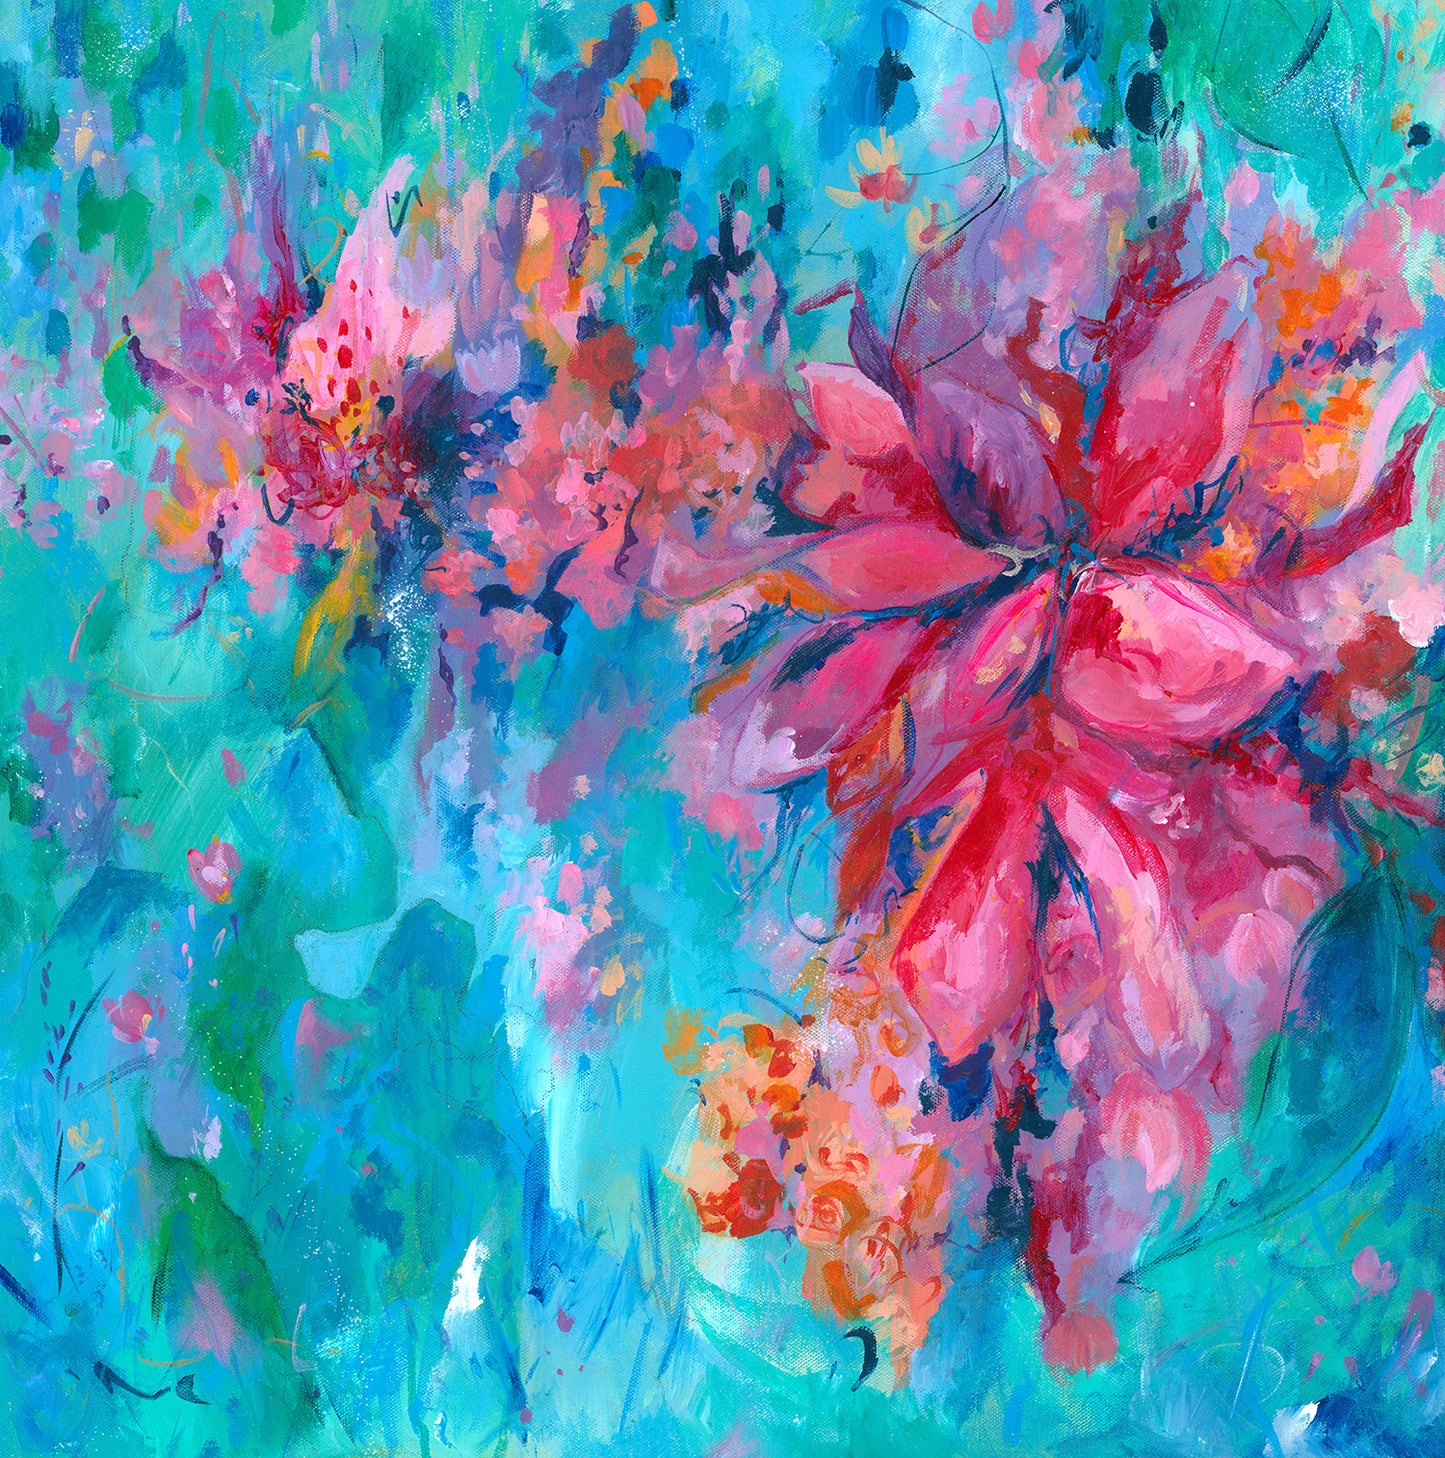 Free spirit acrylic abstract floral painting in vibrant turquoise blue and pinks. Original square flower painting on stretched canvas